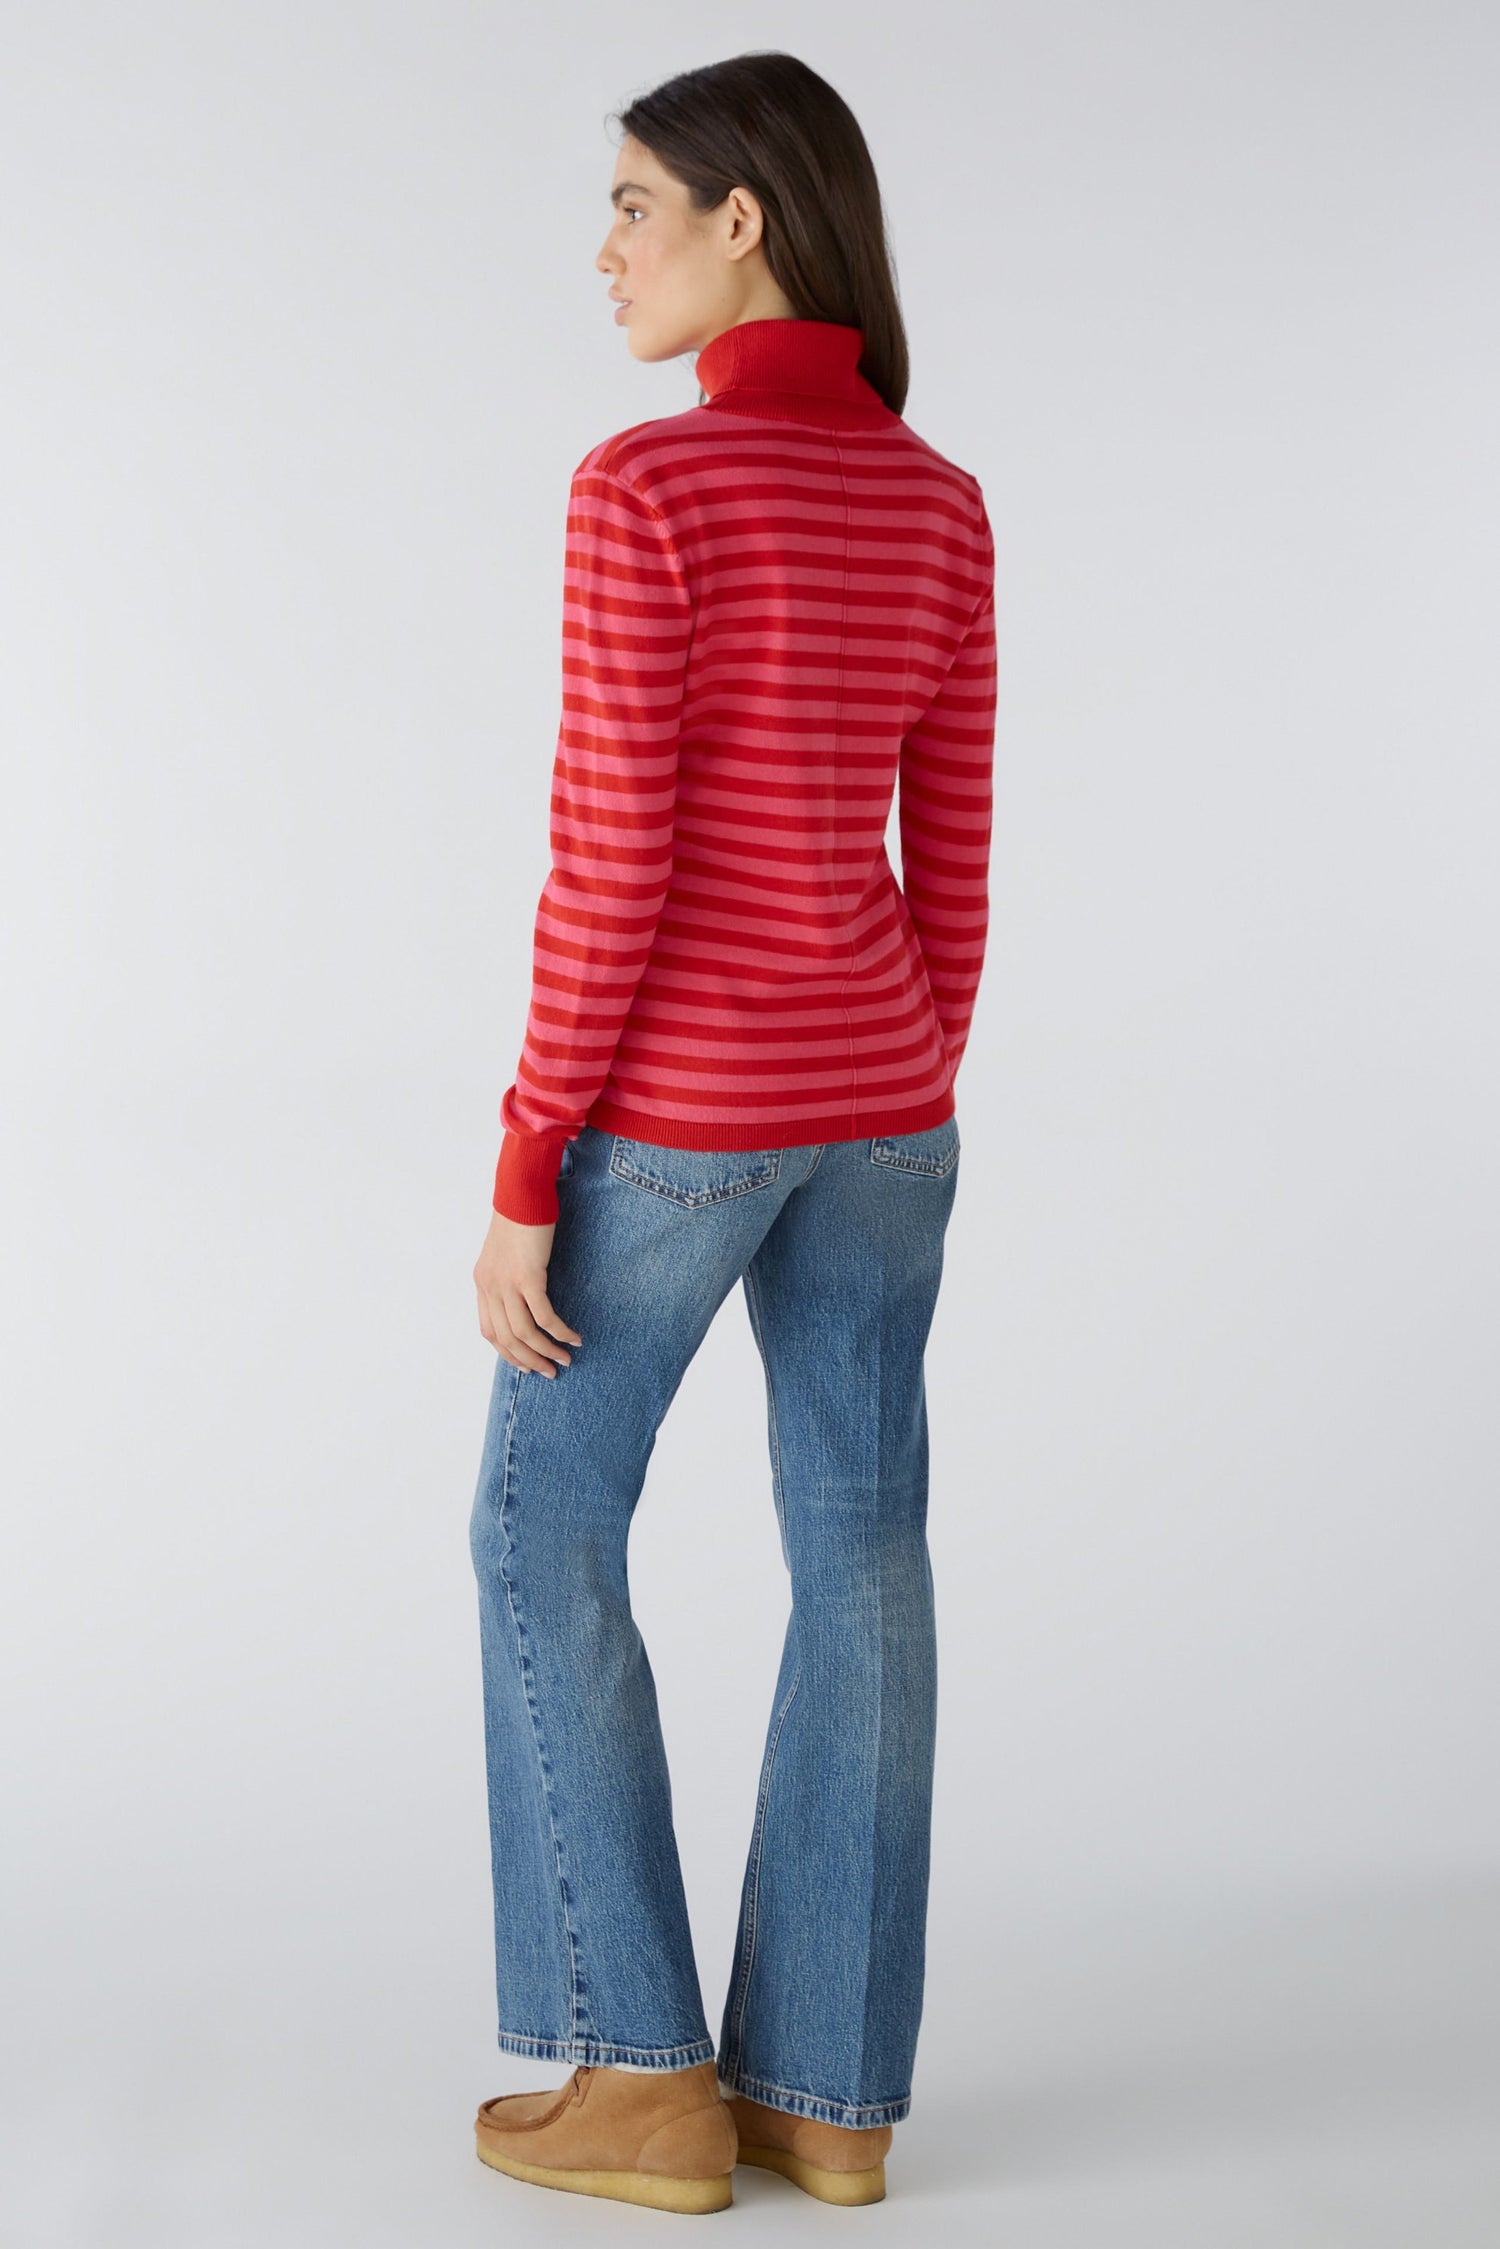 Jumper Cotton Blend With Organic Cotton_79796_0363_03